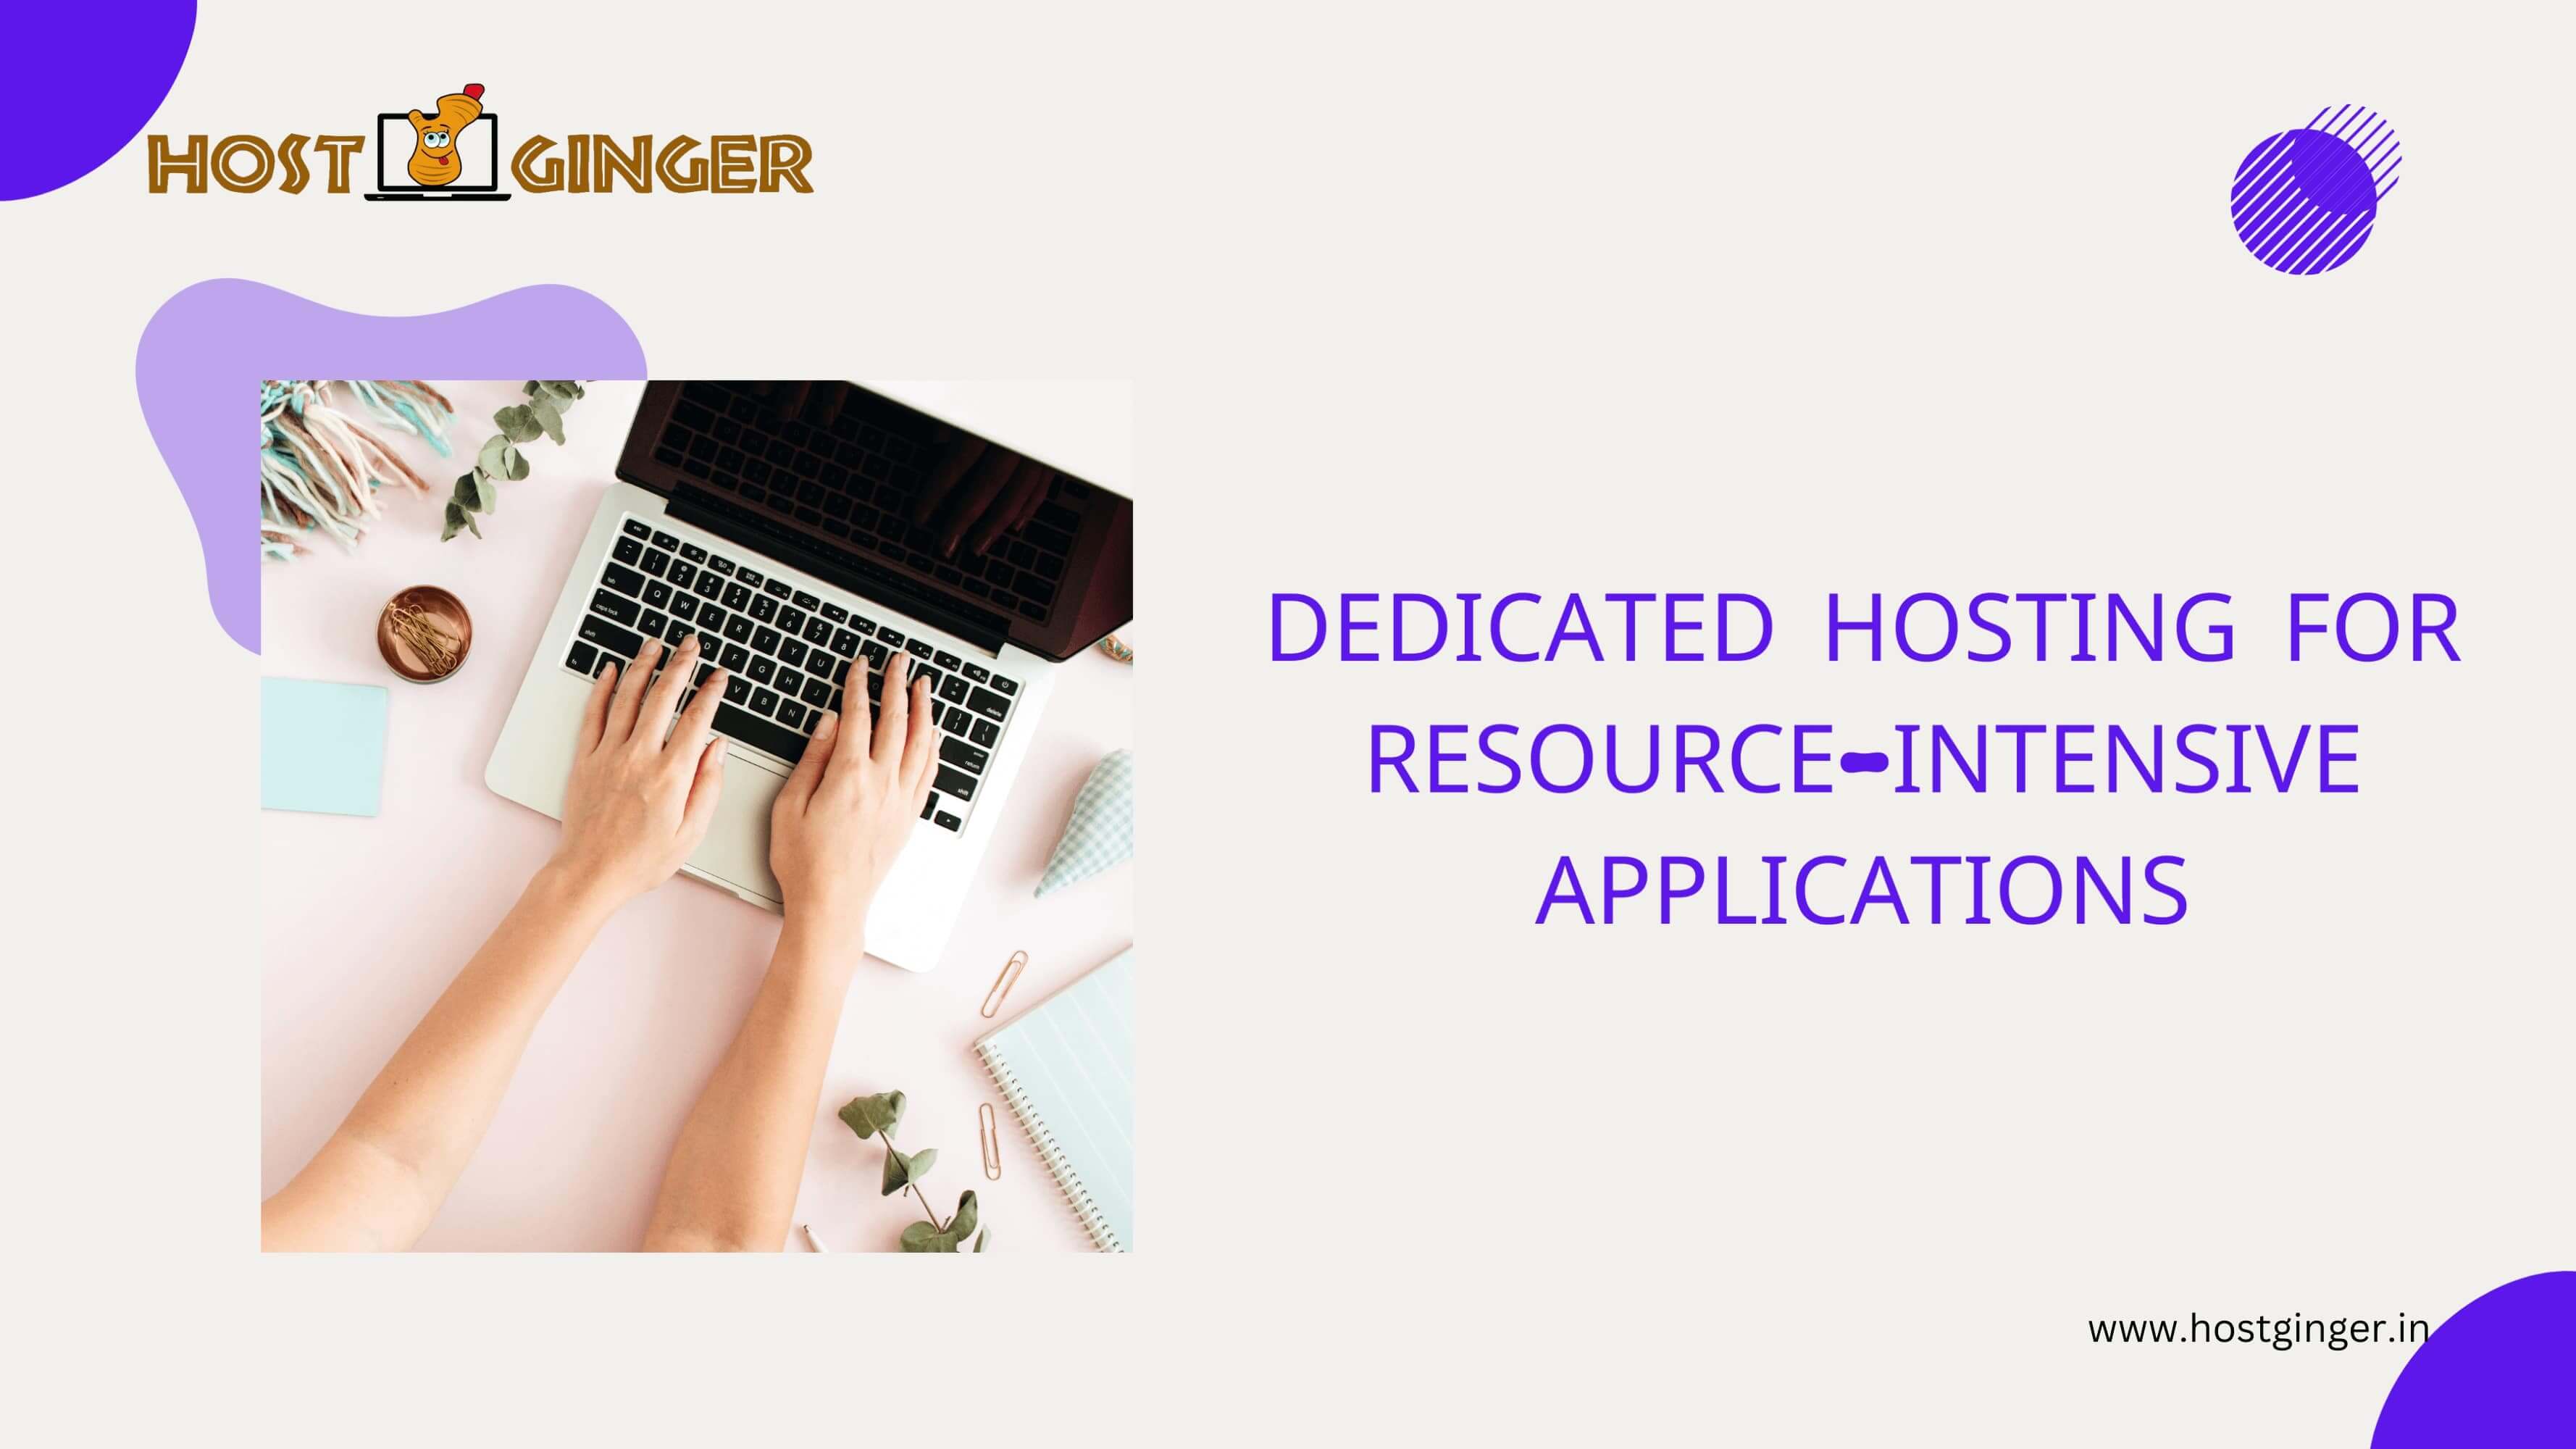 Dedicated Hosting for Resource-Intensive Applications